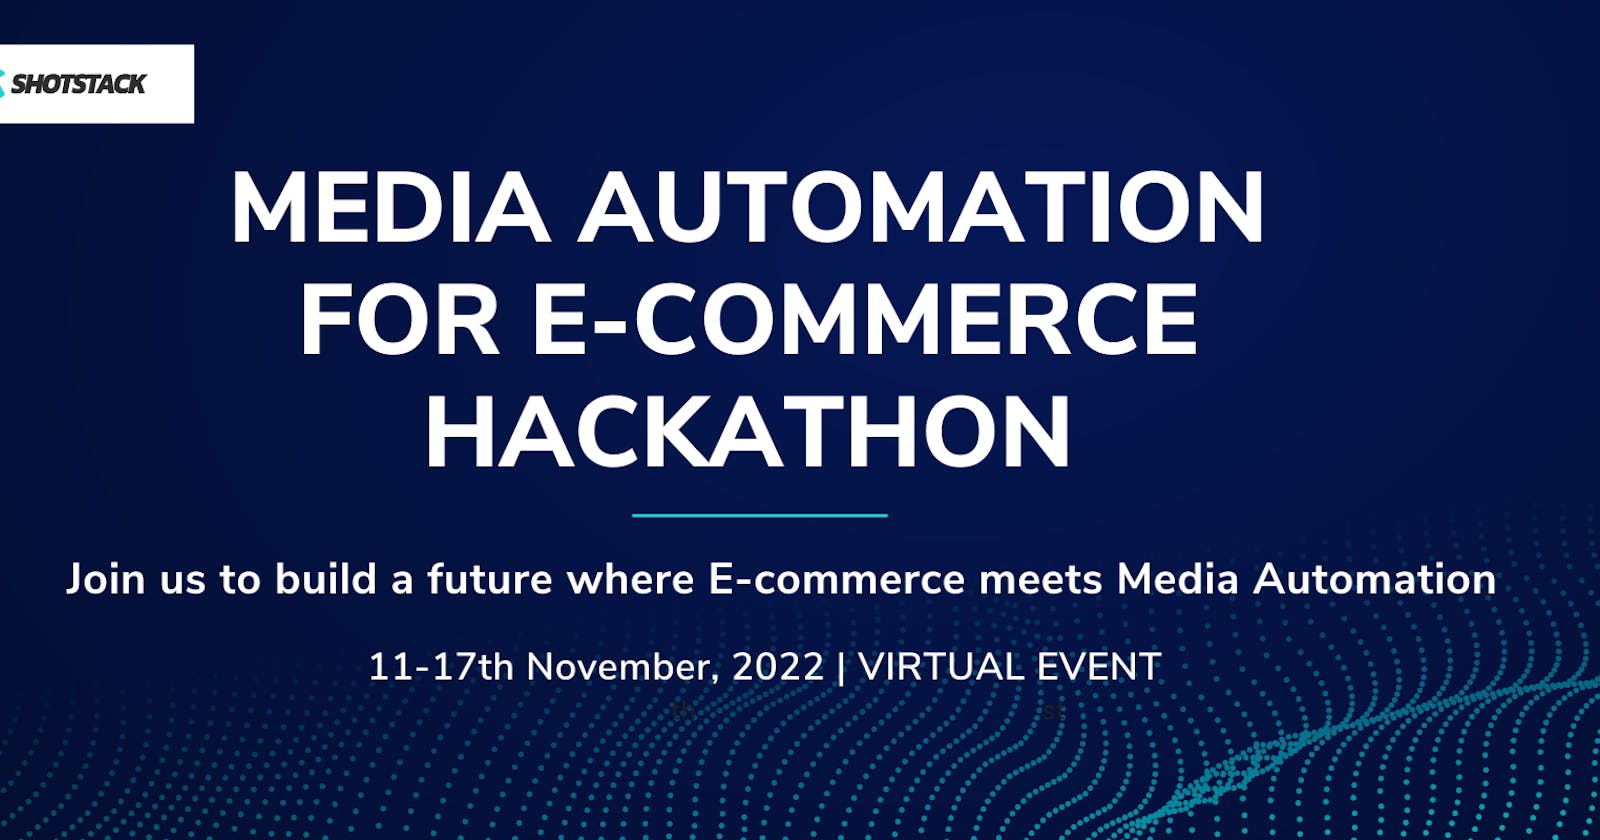 Join us to build the future of E-Commerce through automation